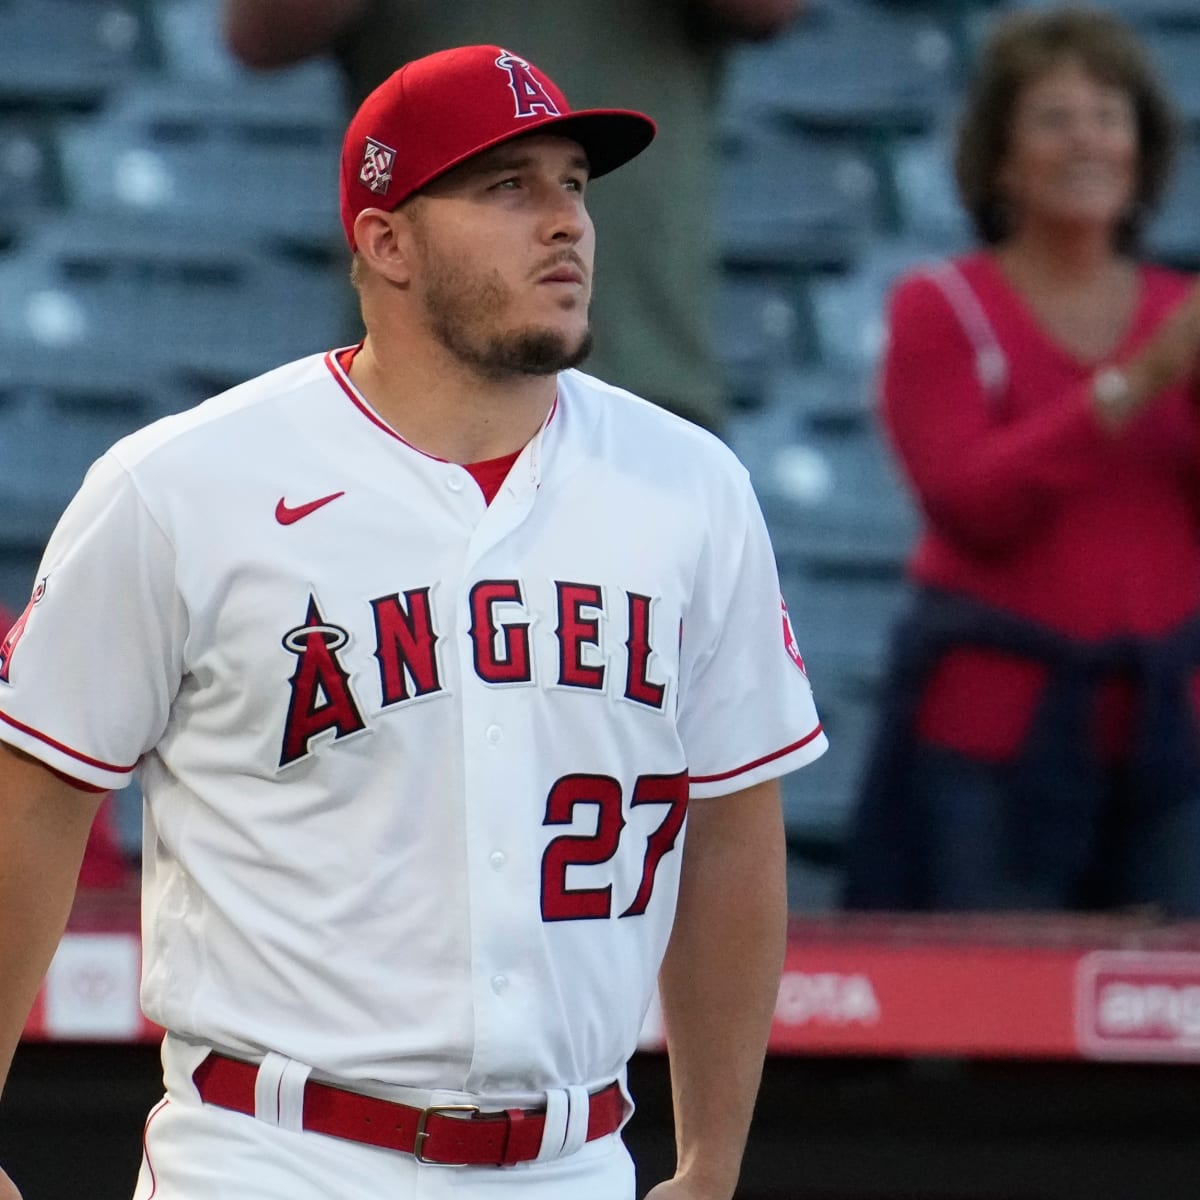 Angels News: Mike Trout's Back Injury Has Been A 'Non-Issue